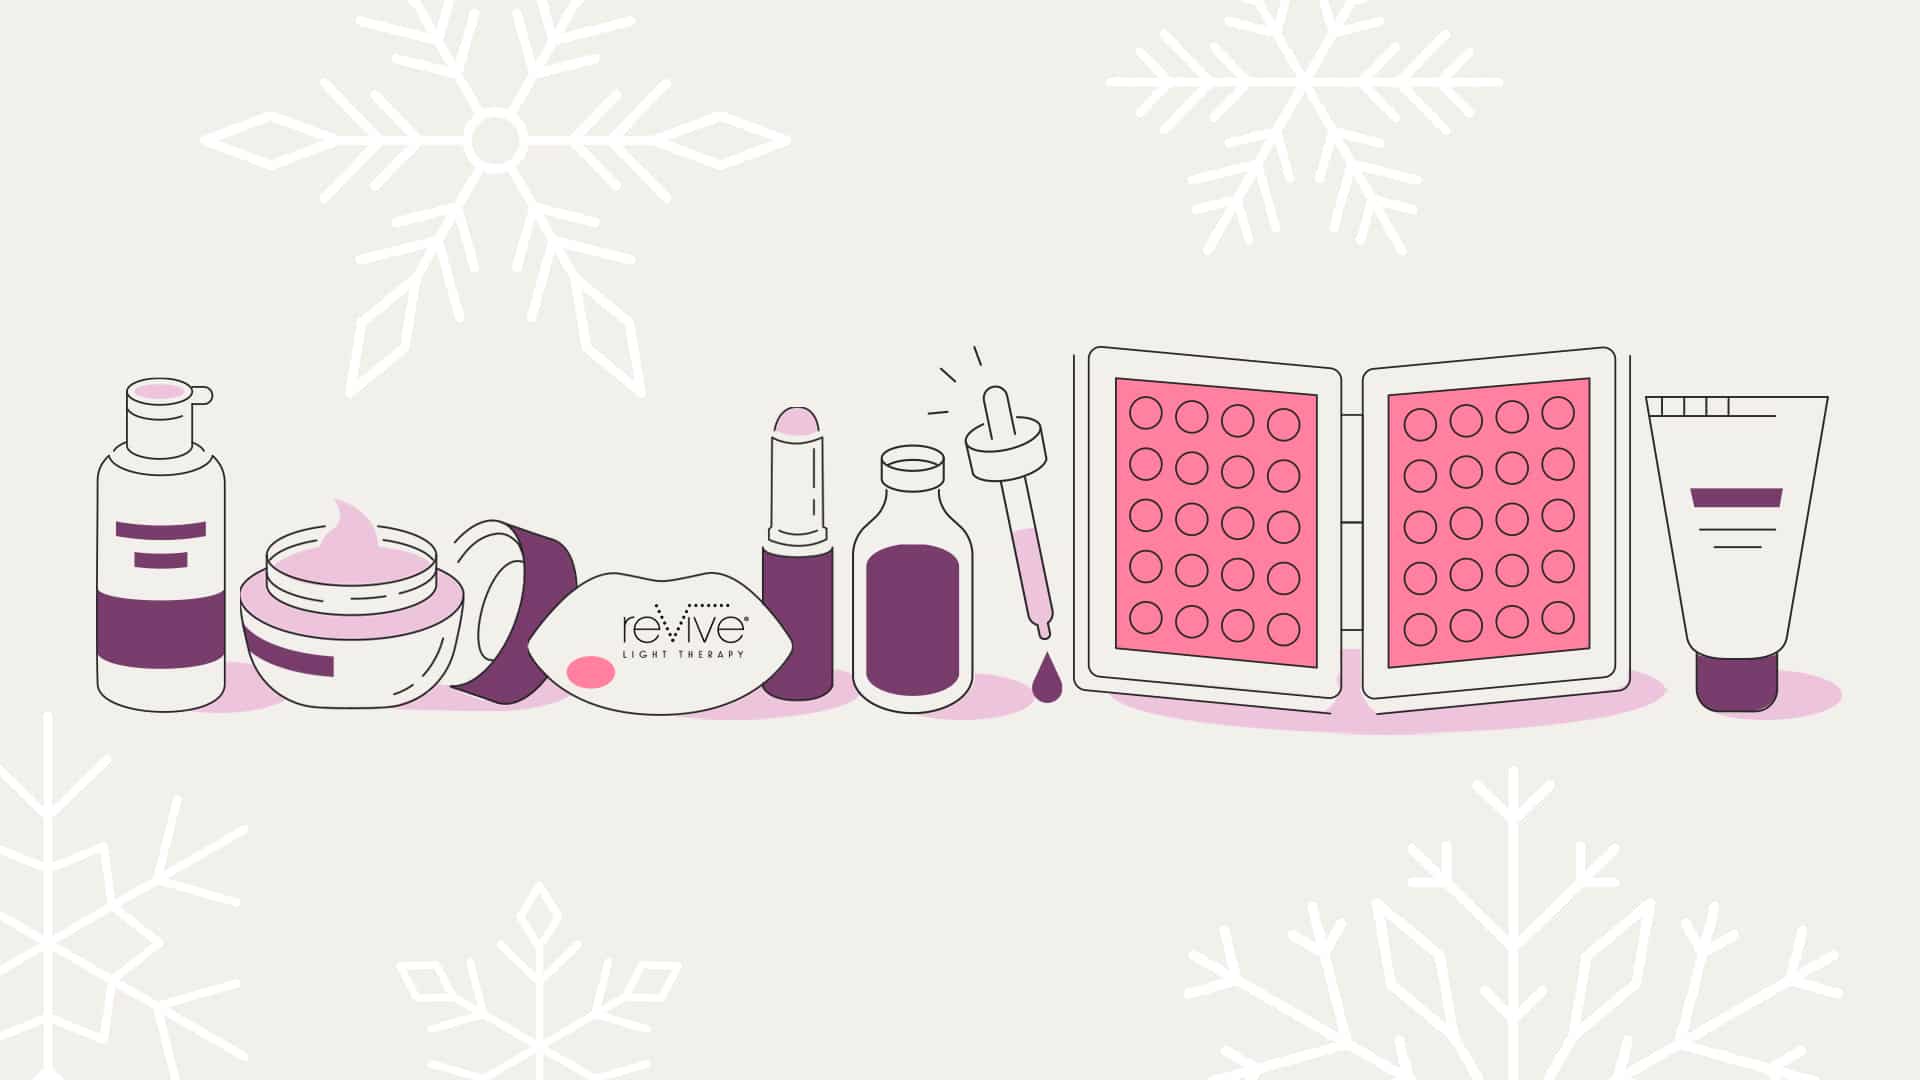 Minimalist illustration of winter skincare products, including red light therapy devices, serums, lip balm, and moisturizers.